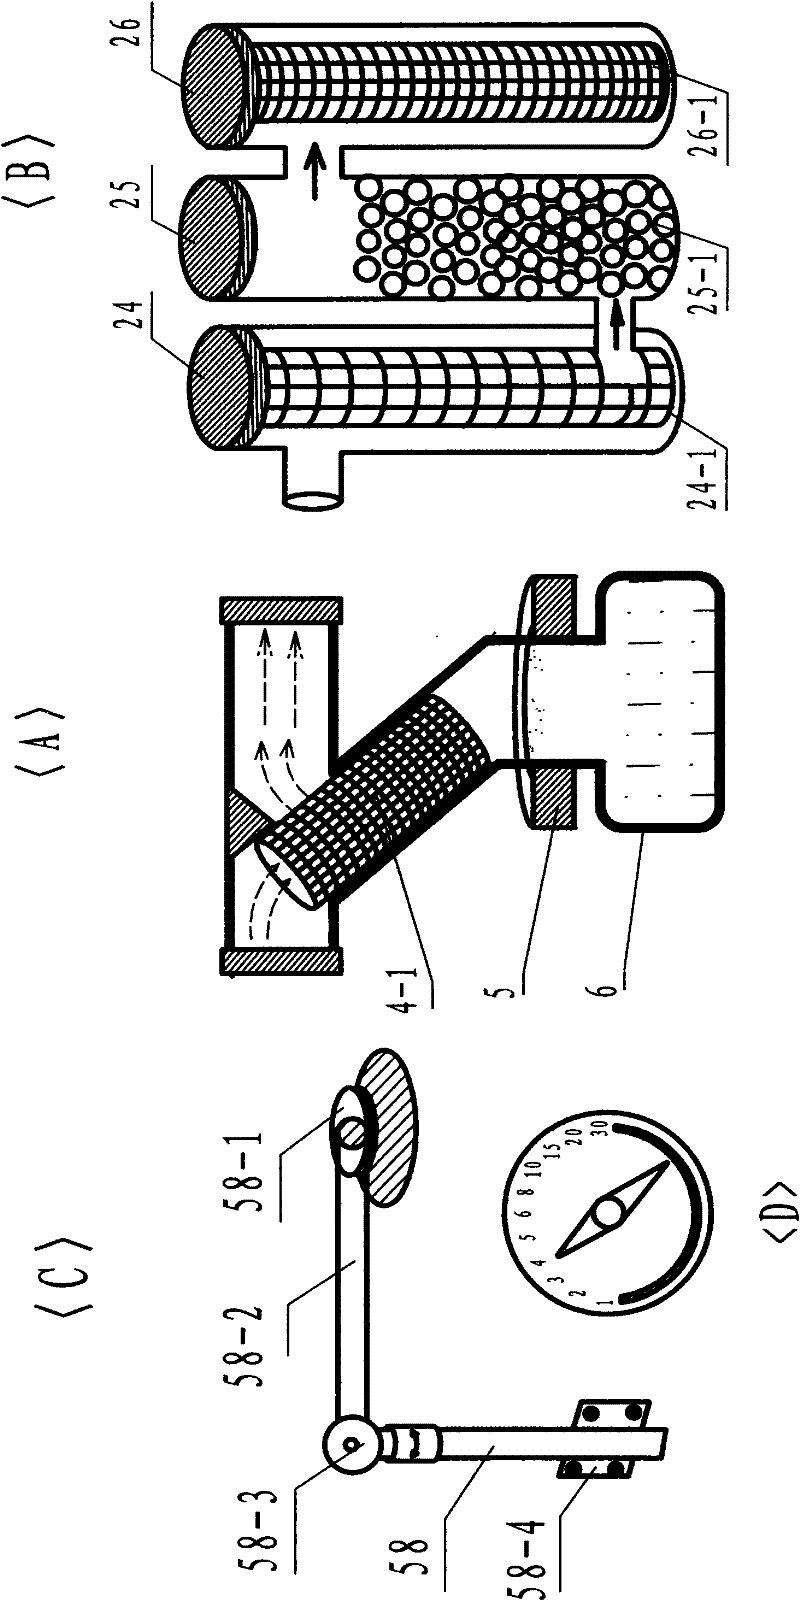 Composite device for safely using and extending function of tap water and gas